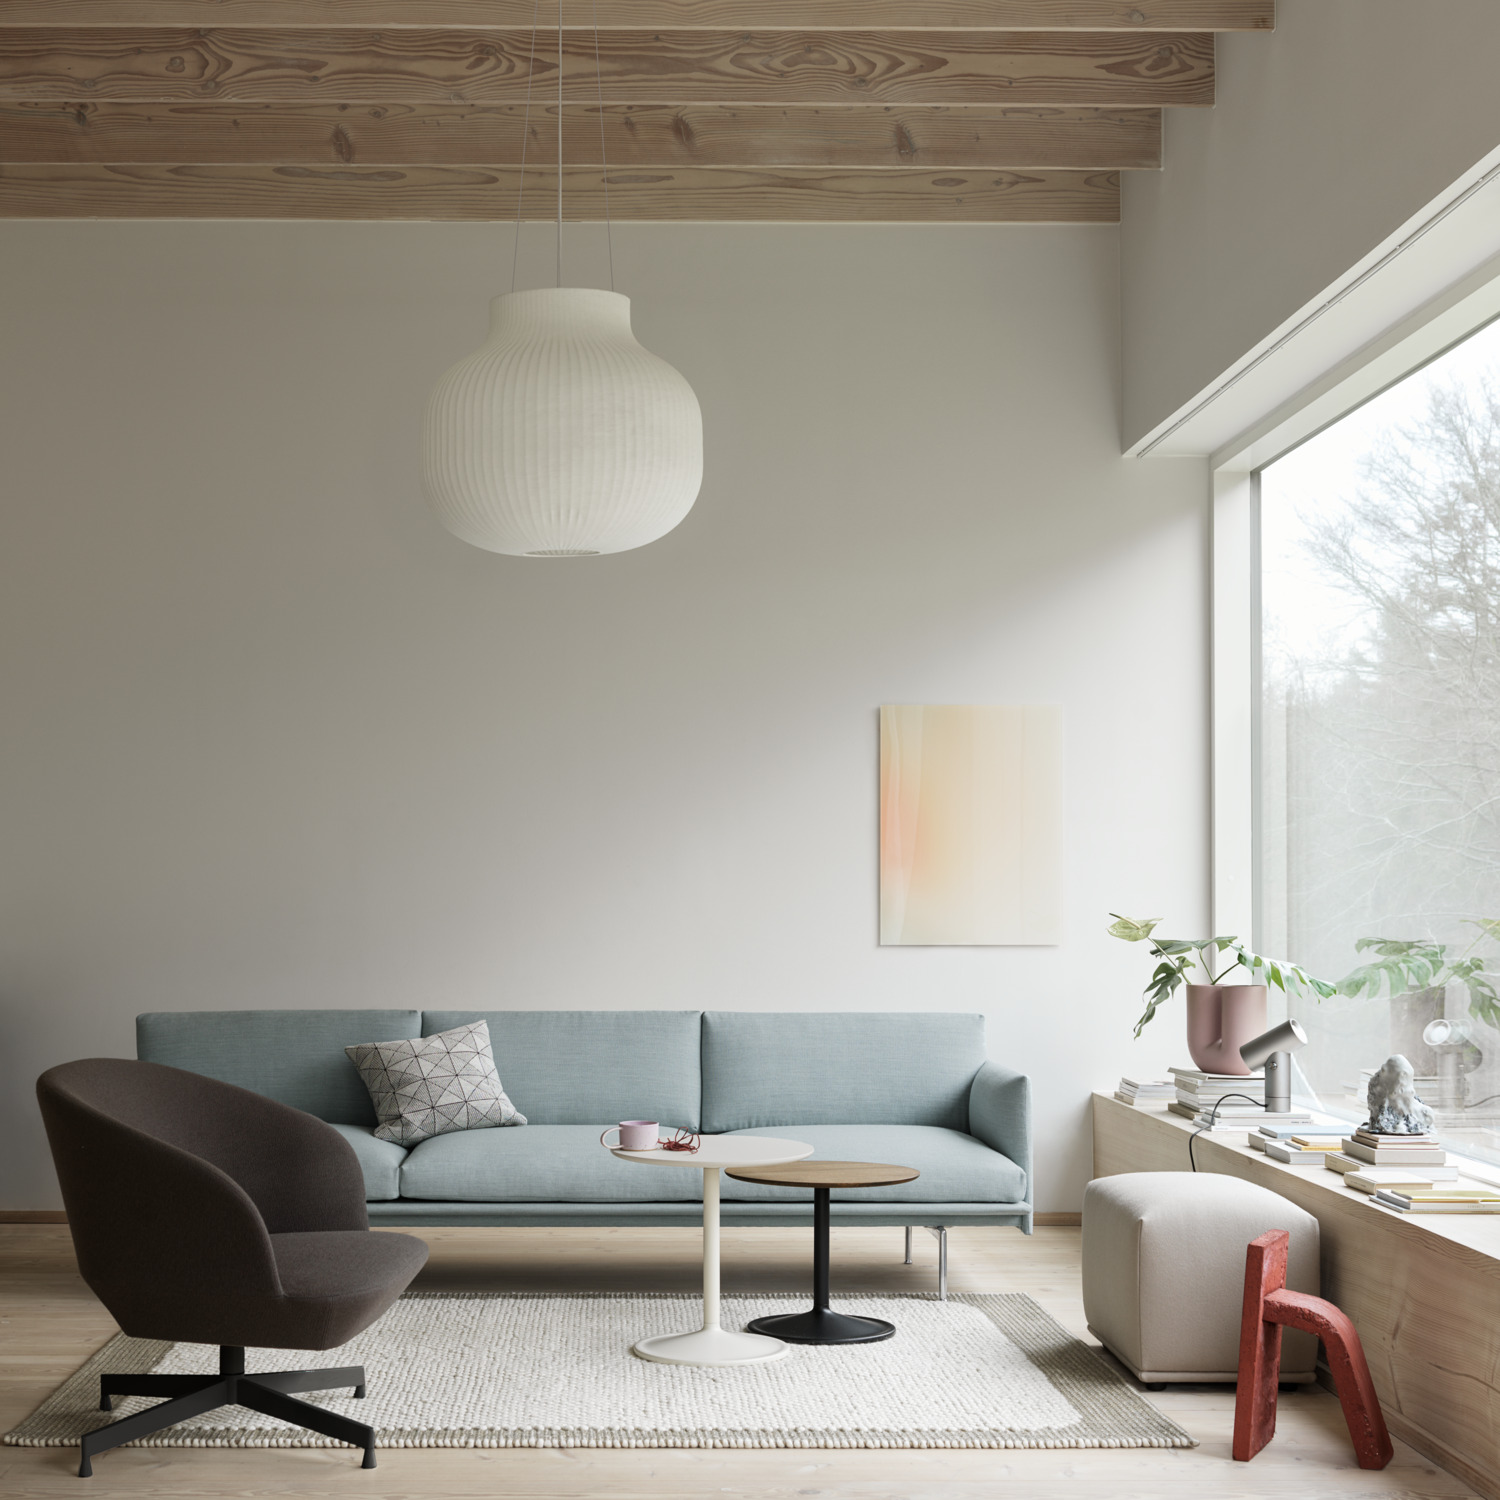 Outline Sofa 3 1/2-Seater - Oslo Lounge Chair in Ocean 50 w. Black Swivel Base - Strand Pendant Ø60 Closed - Echo Pouf 62x42 in Divina 224 - Soft Side Table in Off-White & Smoked Oak/Black - Pebble Rug in Light Grey